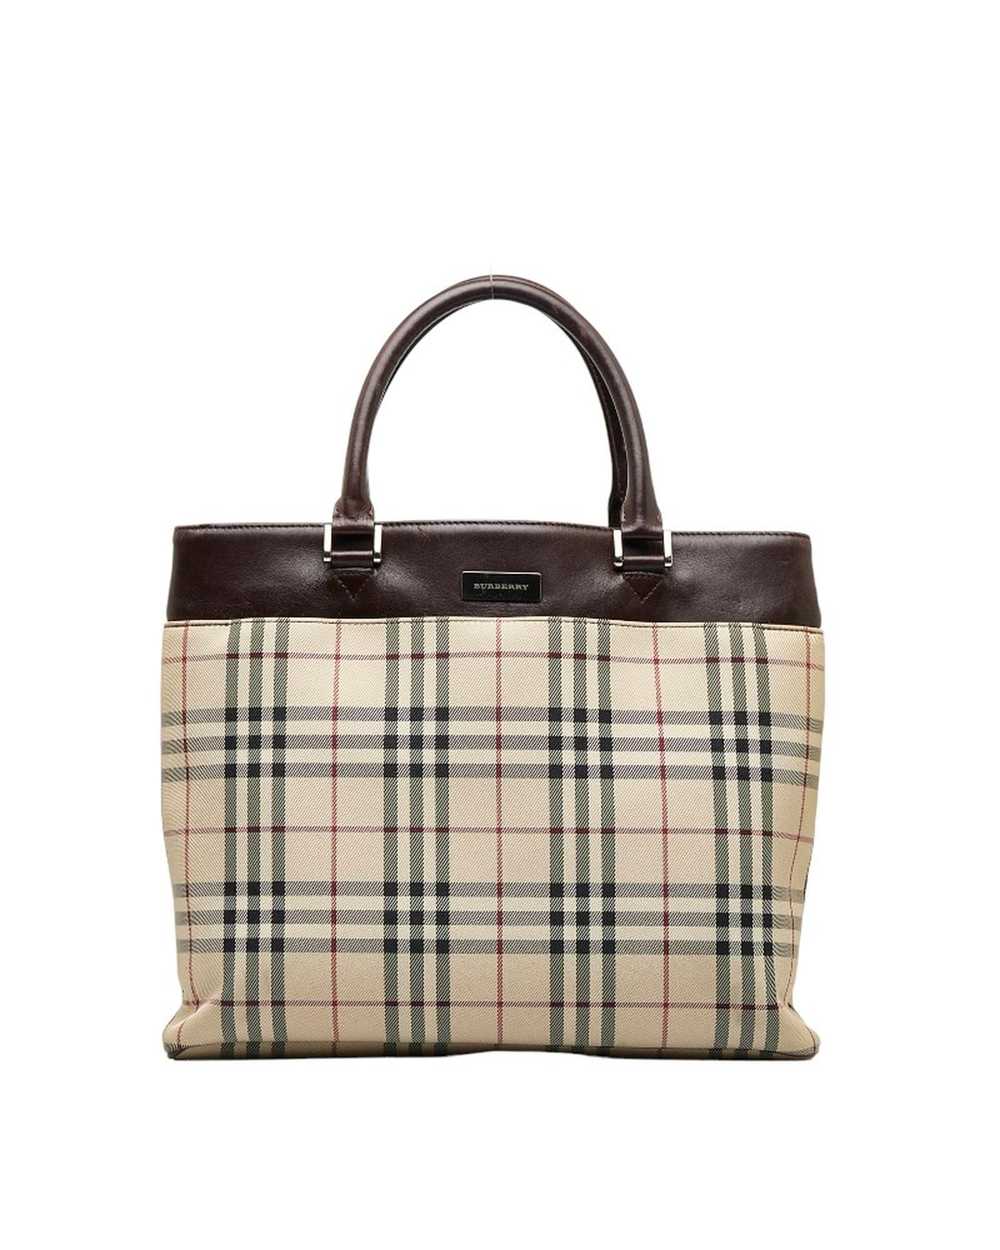 Burberry Classic Check Tote Bag in Brown - image 1